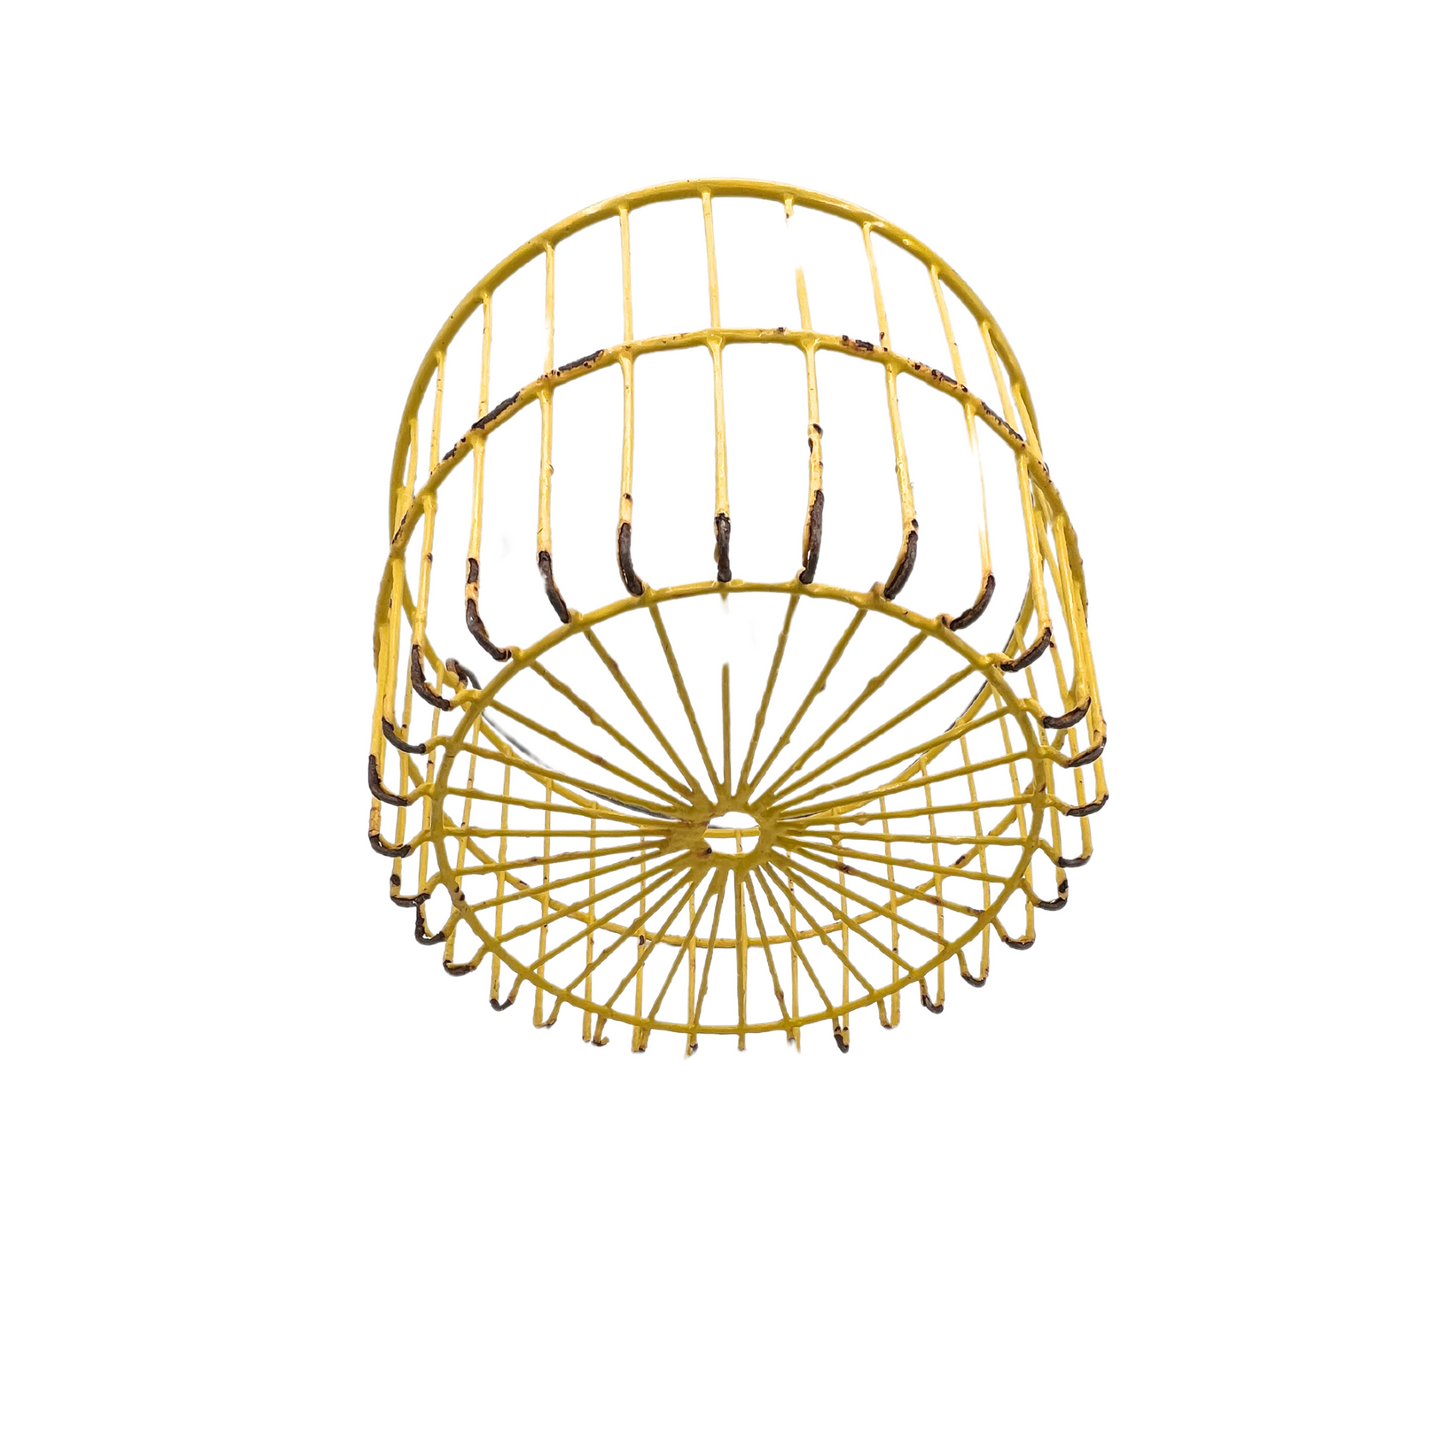 salvaged yellow clam basket